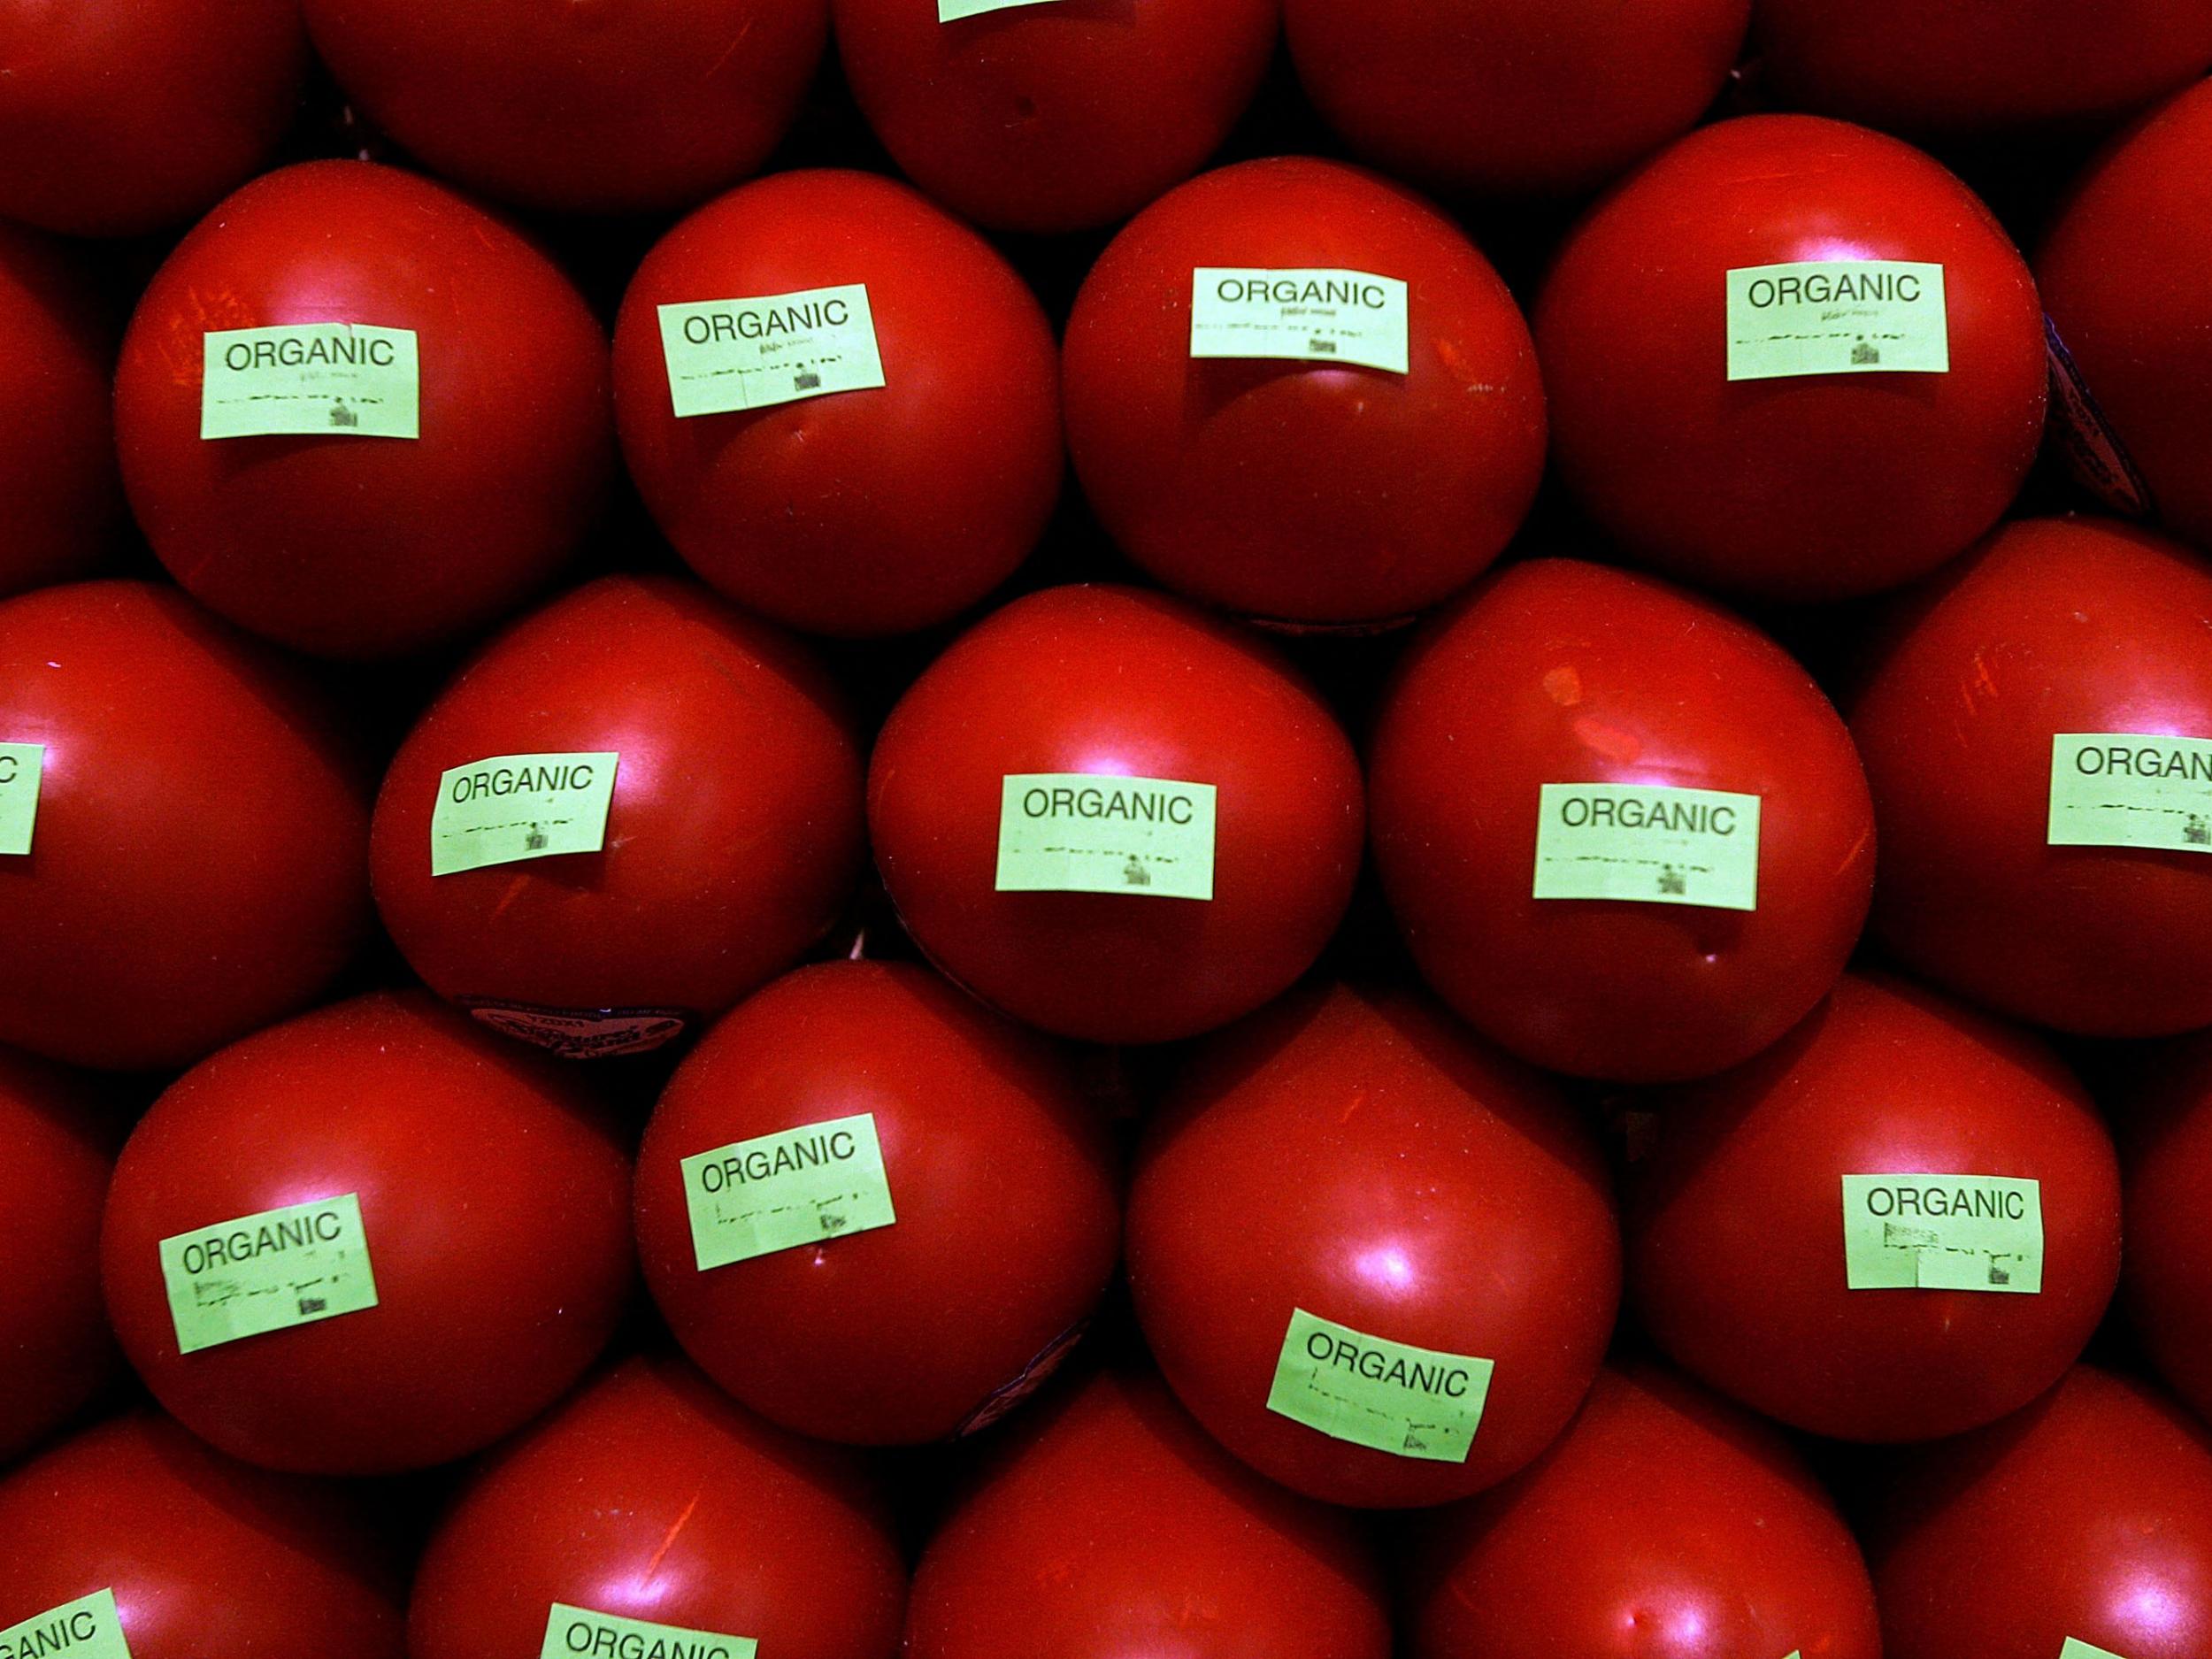 A display of organic tomatoes